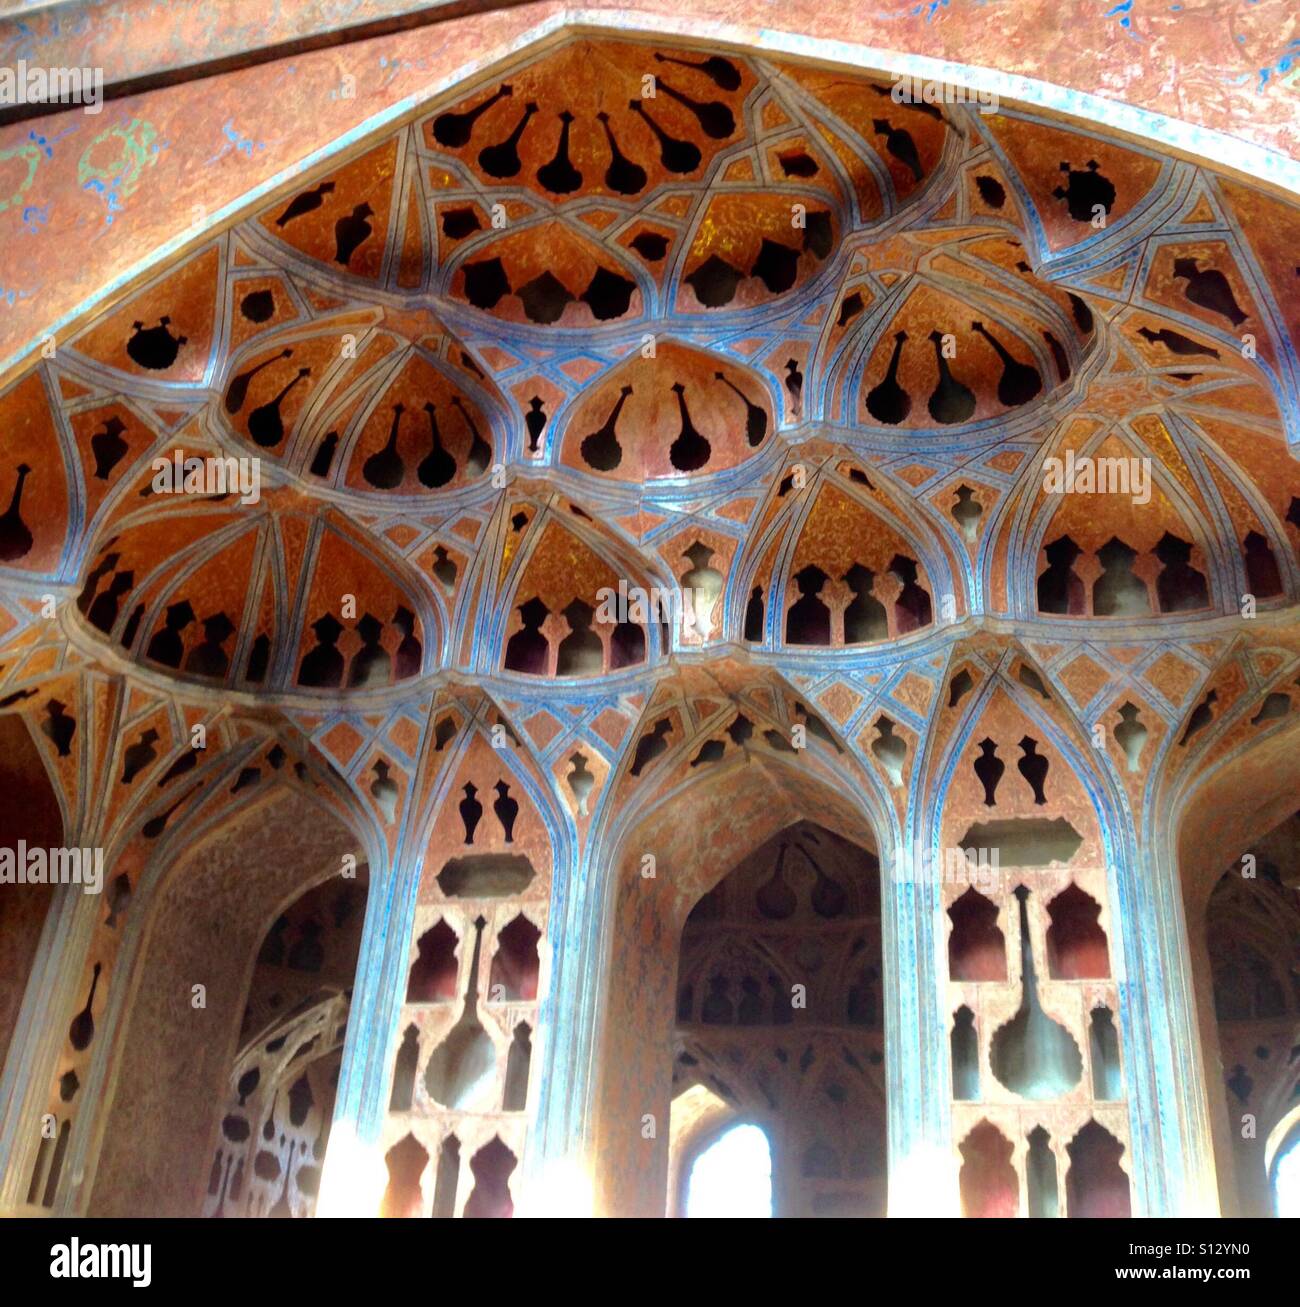 Music room architecture in iran-Isfahan Stock Photo